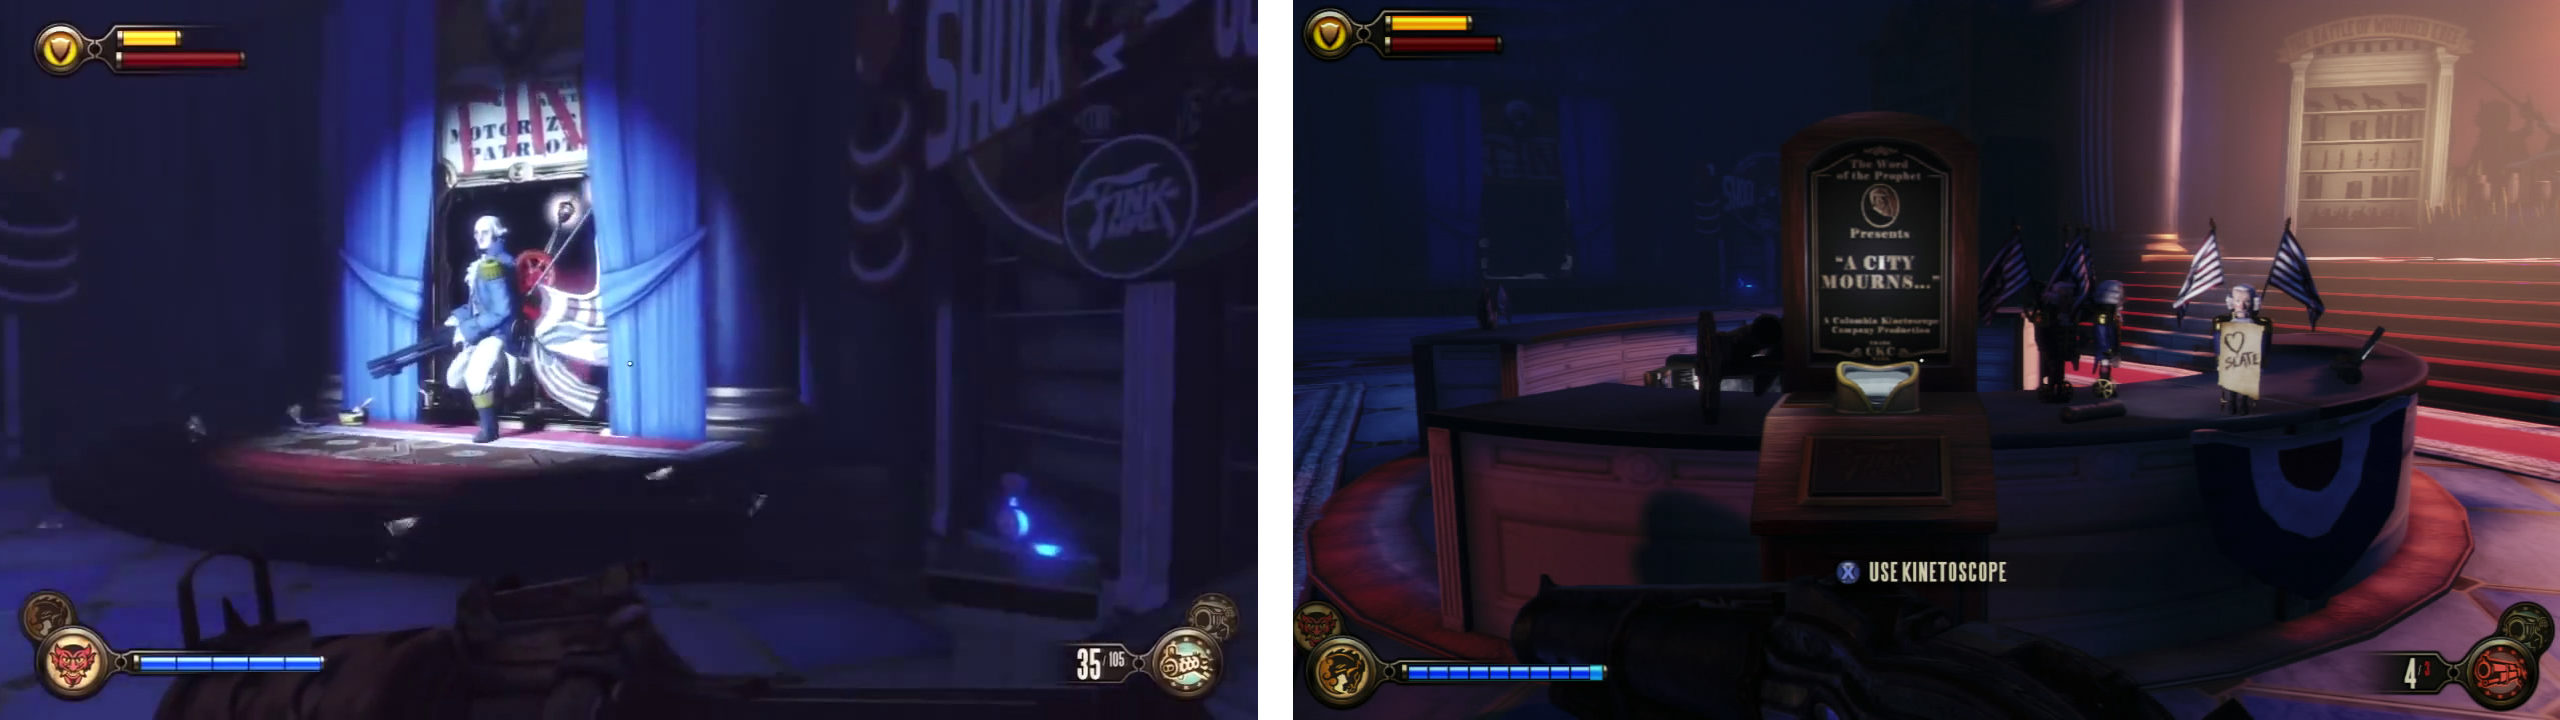 Defeat the Patriot (left) and then use the Kinetoscope in the centre of the room (right).